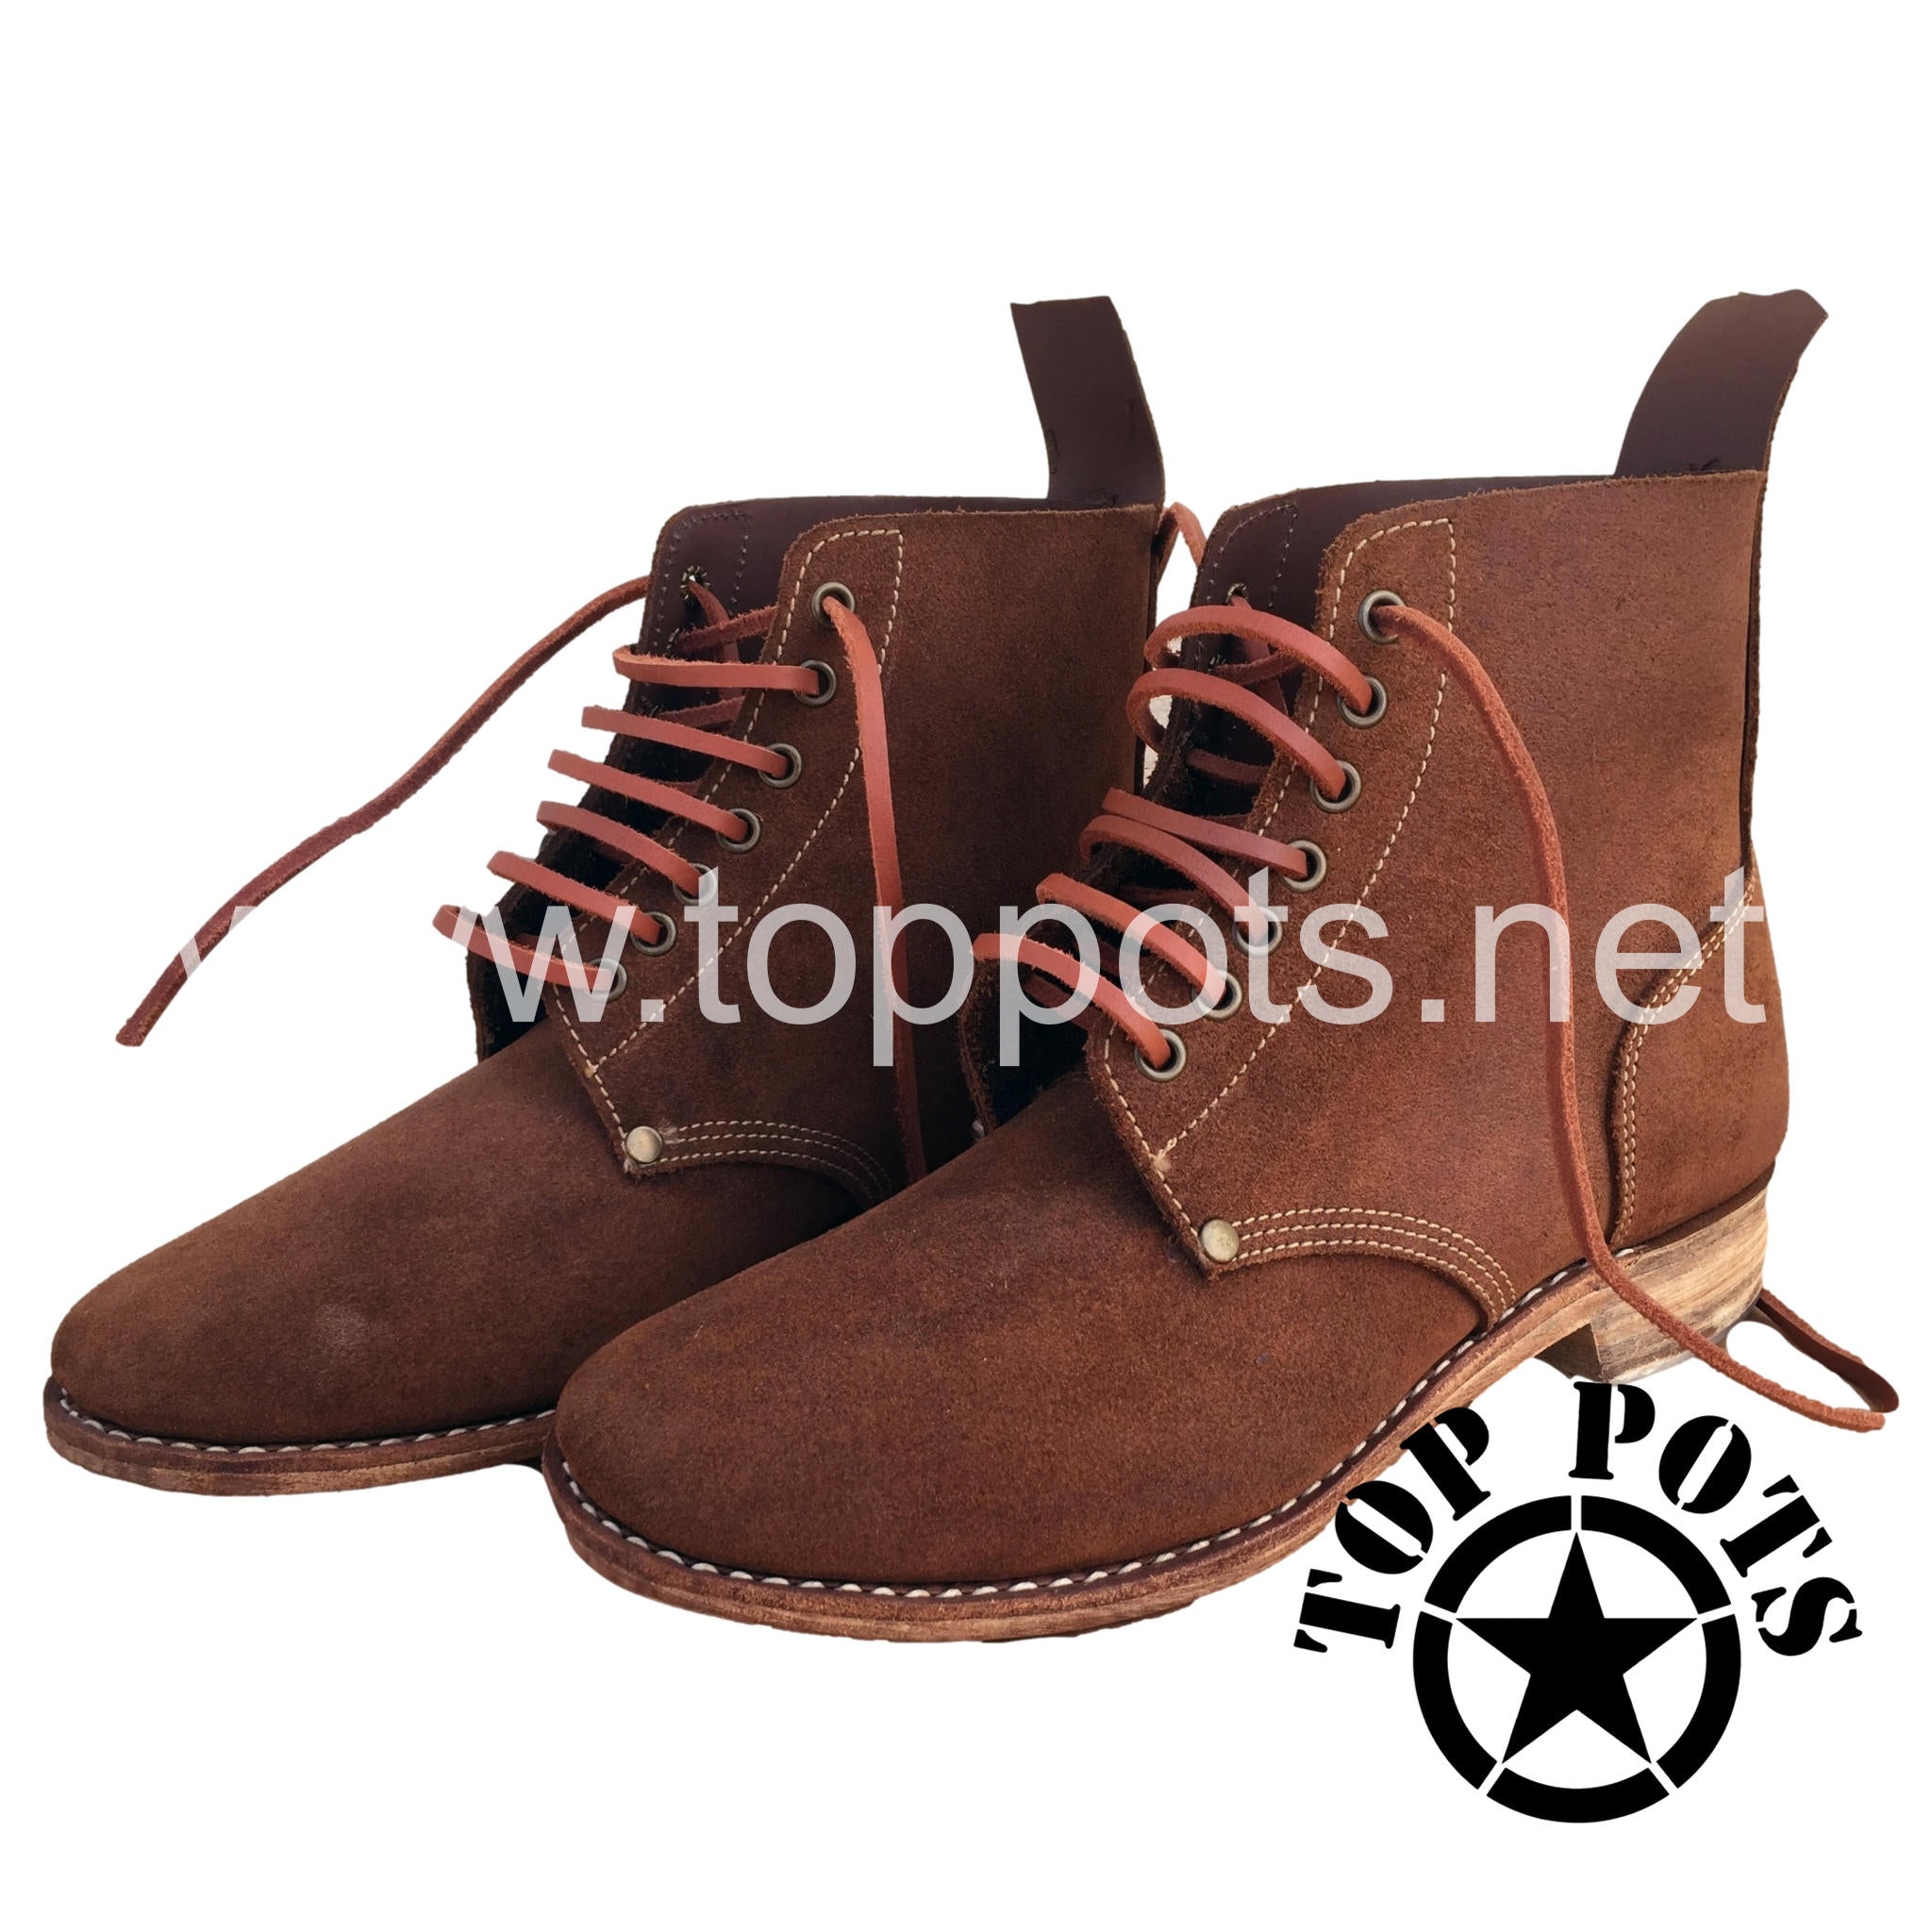 Brown Ankle Boots - corneld.com | Boots, Ankle boots, Lace up ankle boots